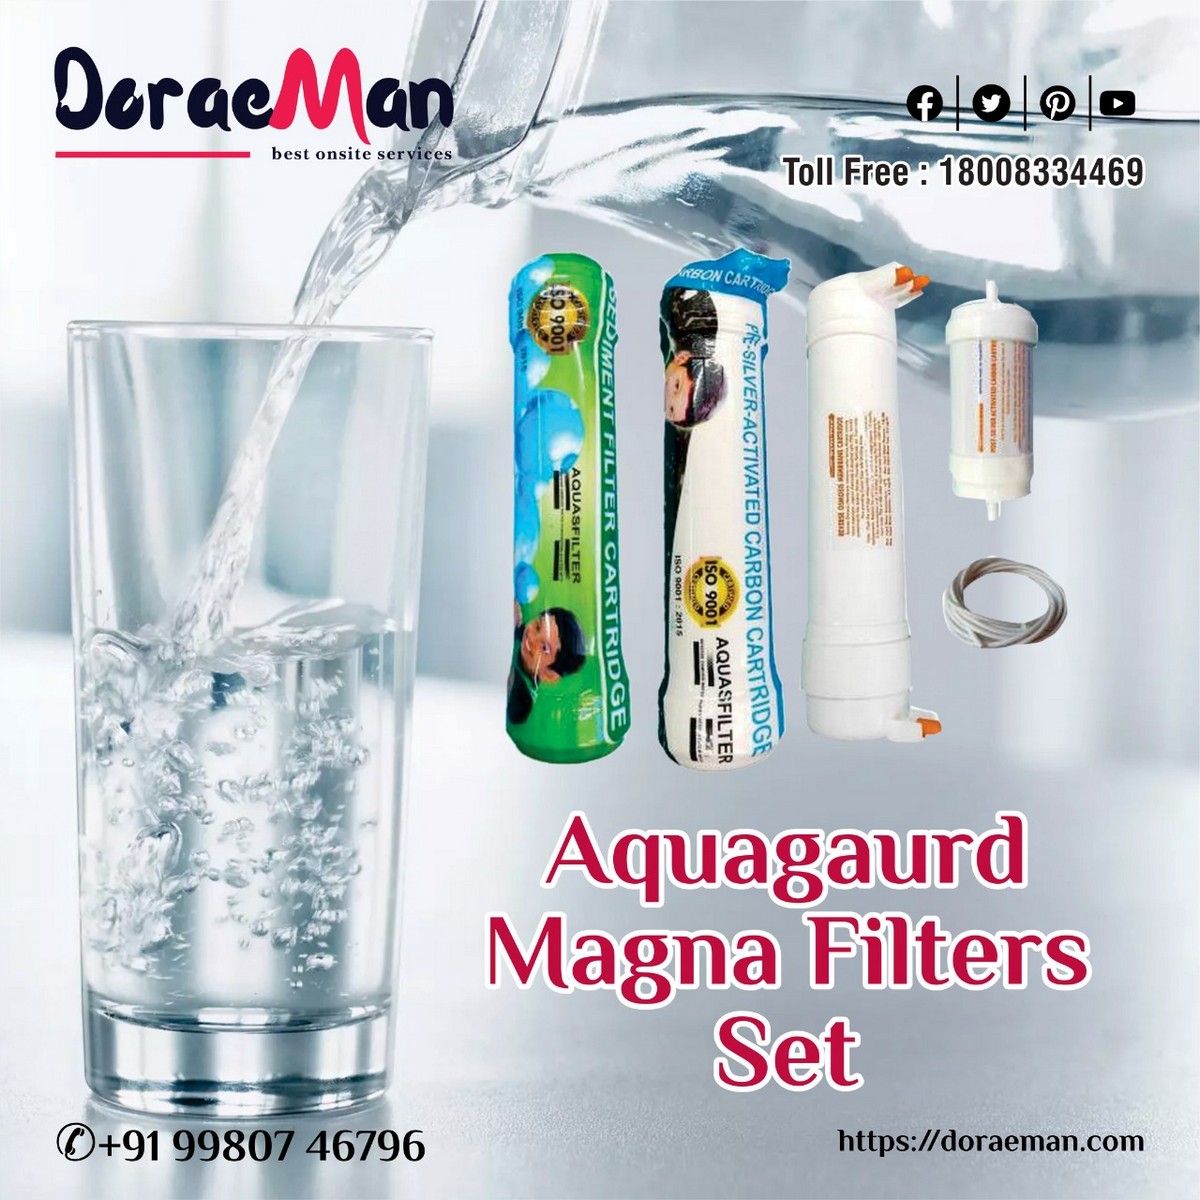 Drink pure and mineral-rich water by getting it filtered in the best manner. Lay hands on high-quality Magna Filters set from Doraeman and get your water purification level to an optimum extent.

Buy Now  #besthomewaterpurifier #bestrowaterpurifier

https://t.co/4O3Amb3tfE https://t.co/LtJftvrSiB